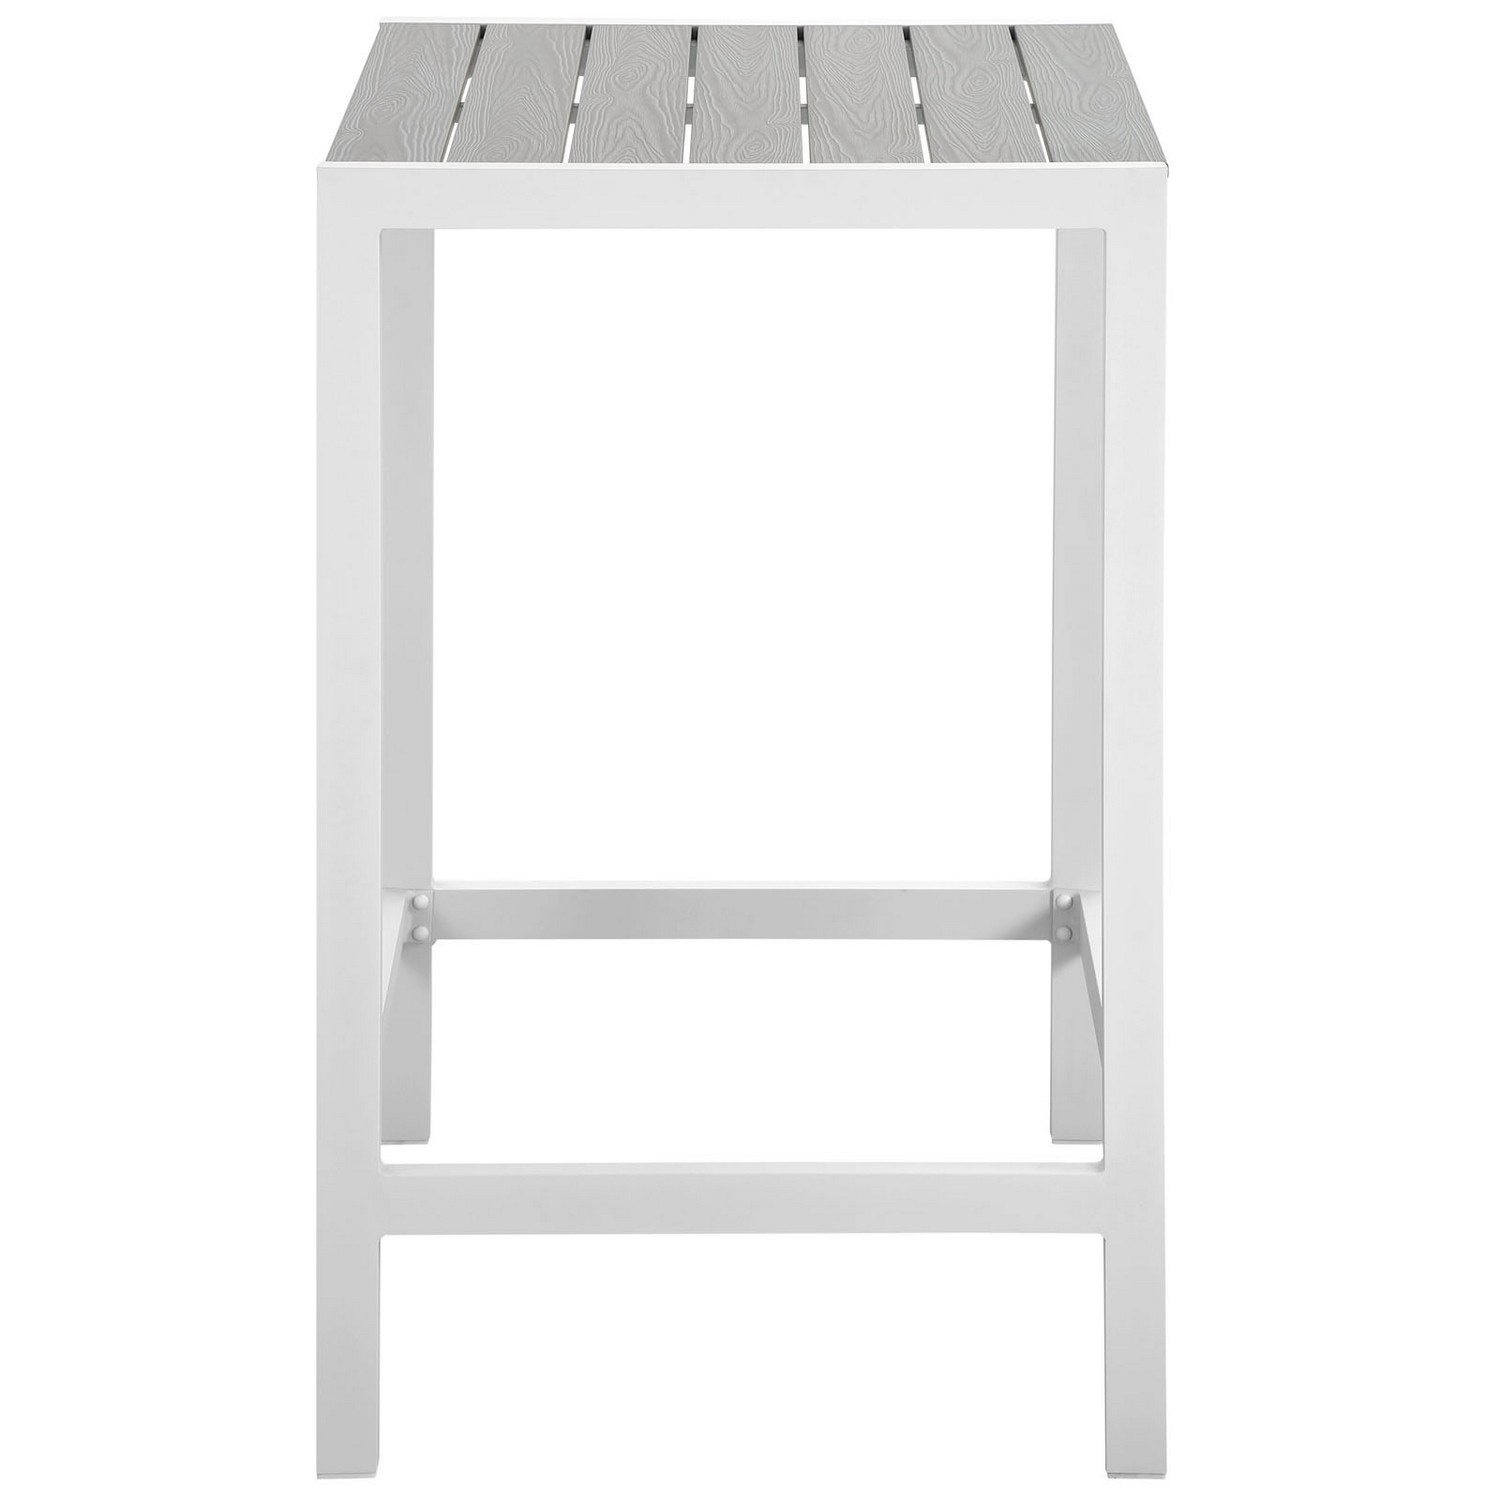 Modway Maine Outdoor Patio Bar Table - White/Light Gray